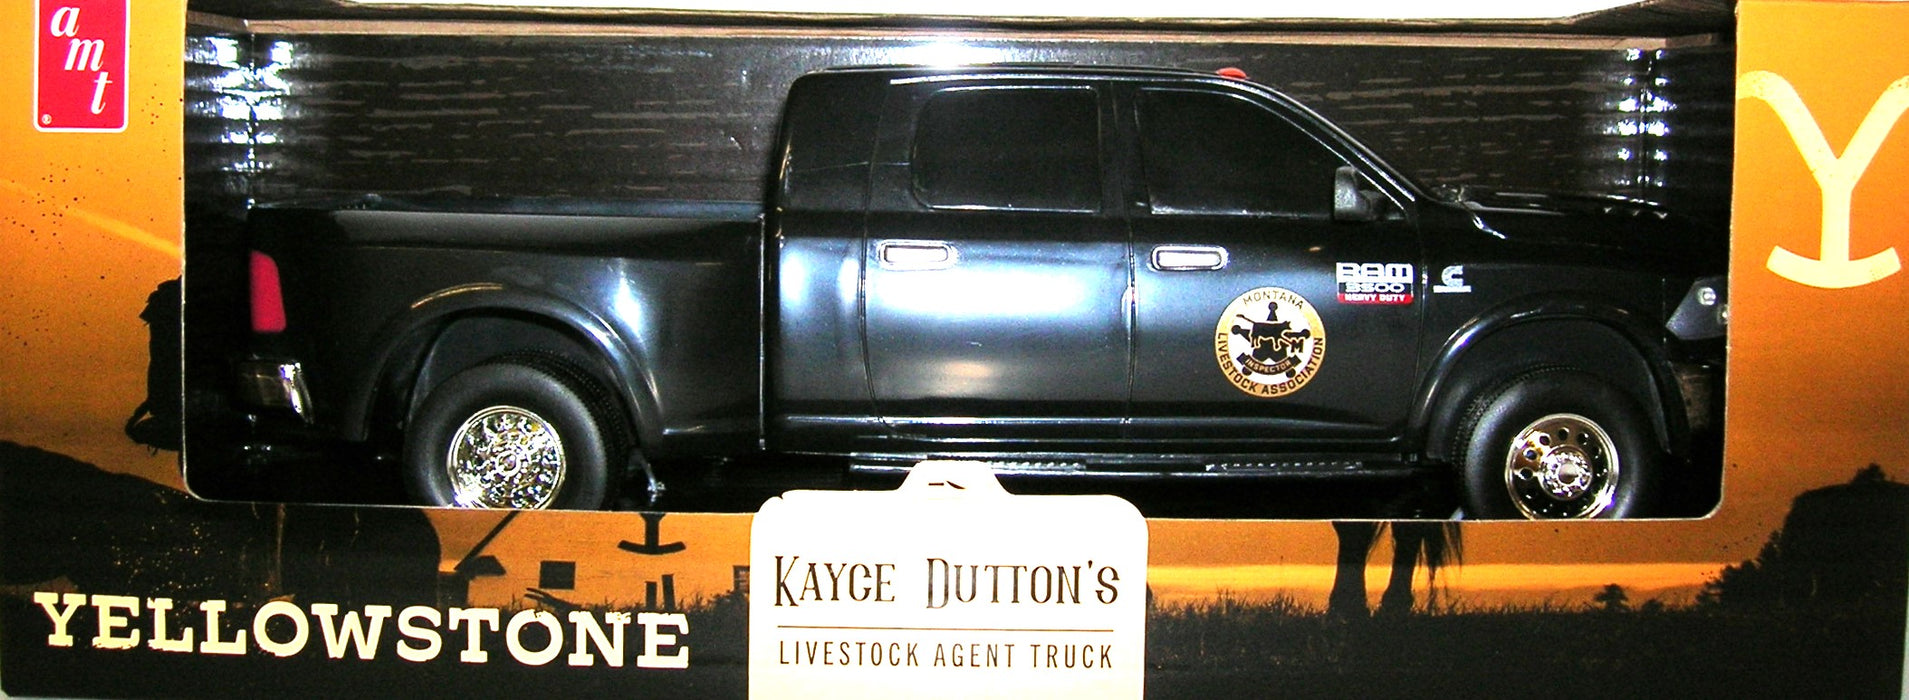 1/20 Big Country Toy Ram 3500 Truck Kayce Dutton's Yellowstone